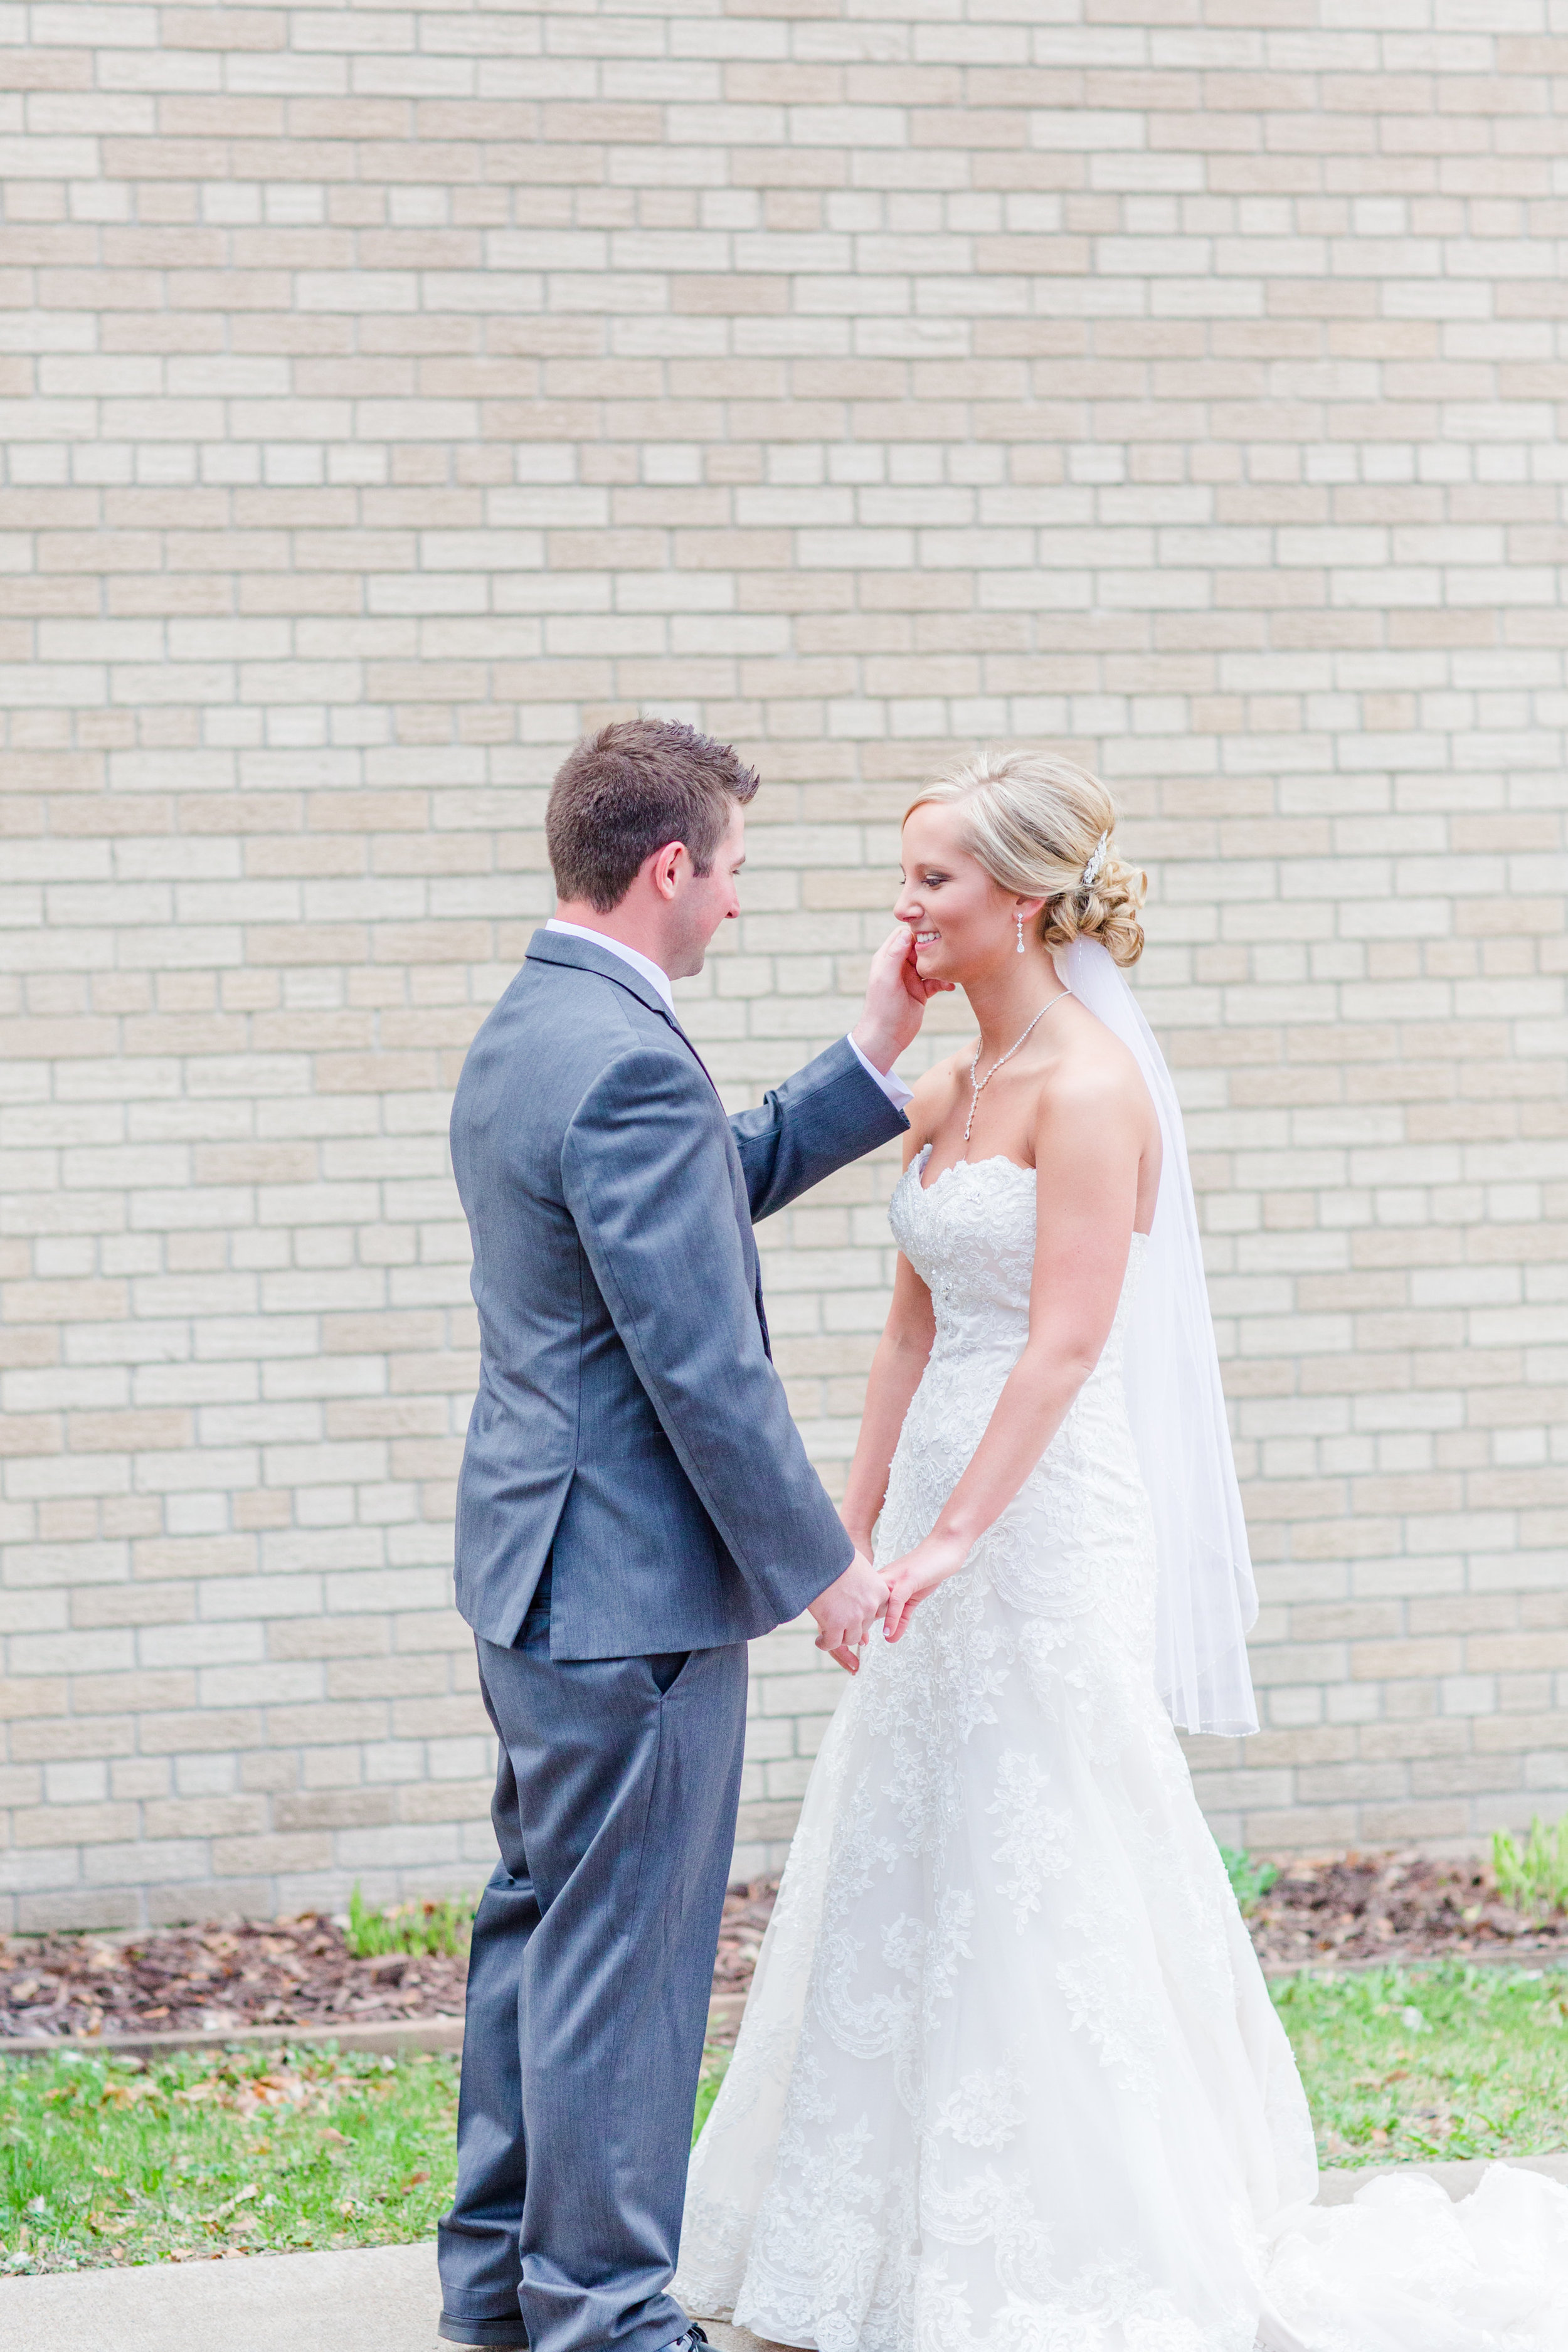 A White + Lilac Romantic Wisconsin Wedding - The Overwhelmed Bride Wedding Blog